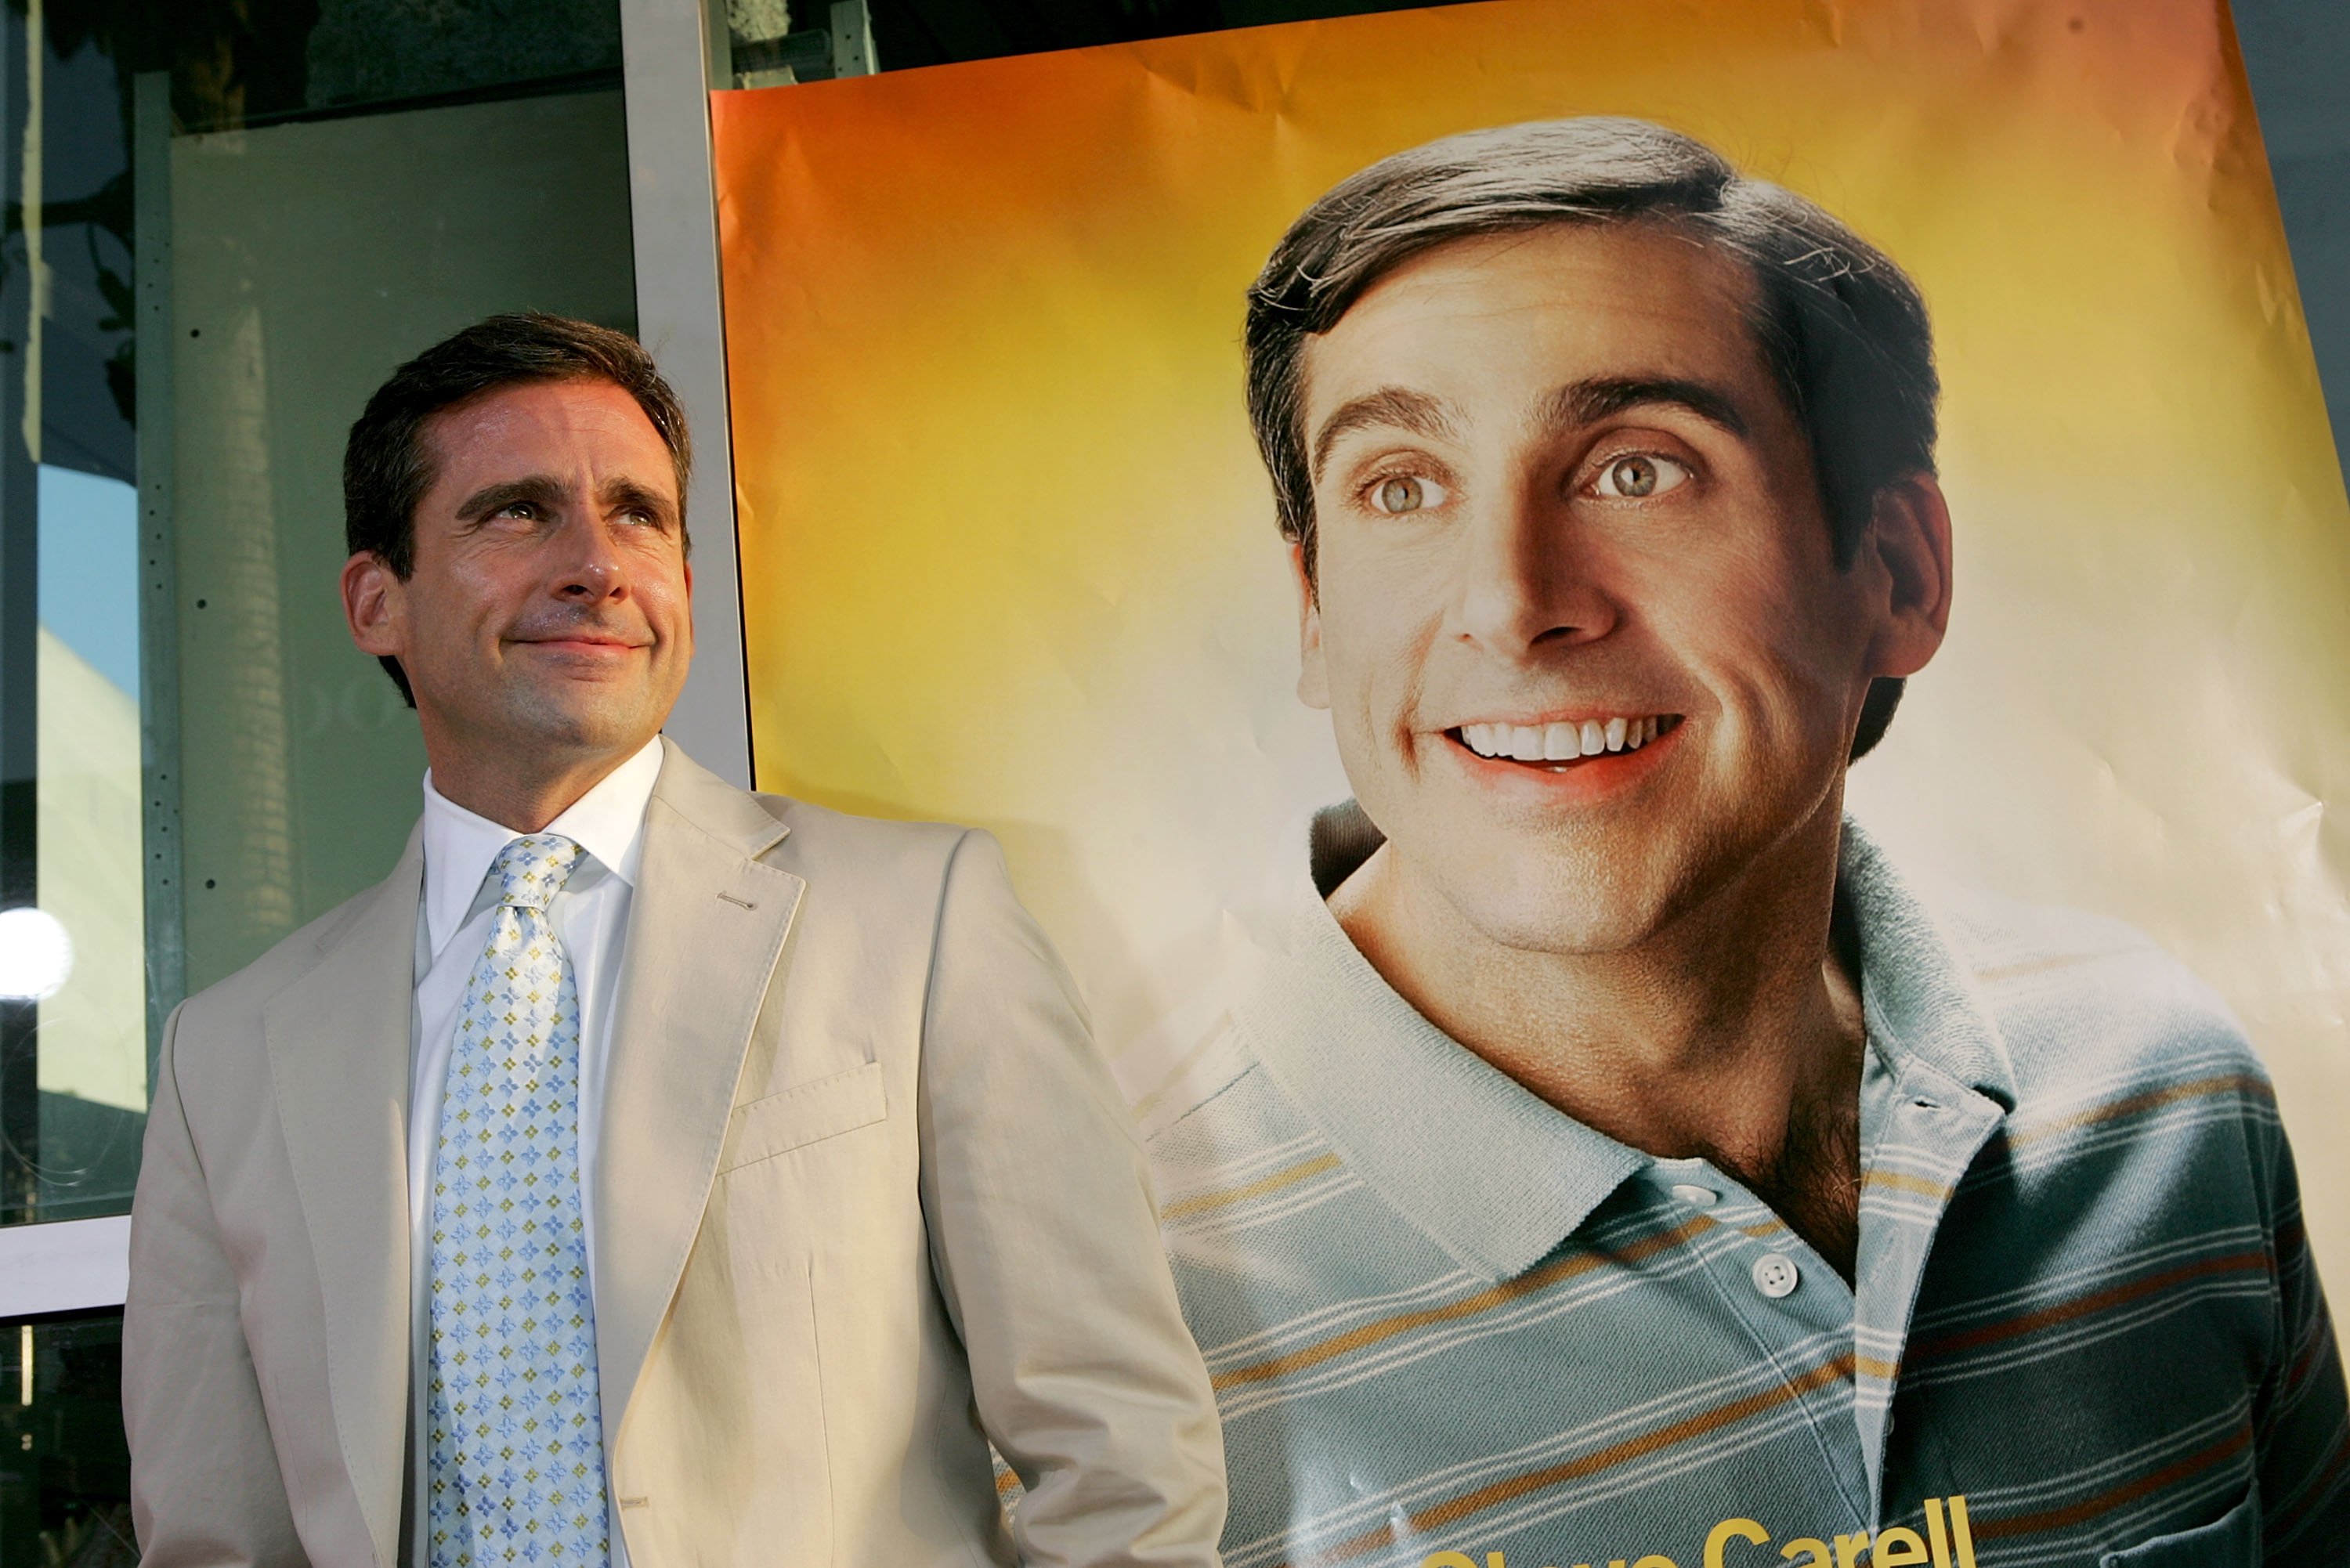 Steve Carell attends the premiere of The 40 Year Old Virgin